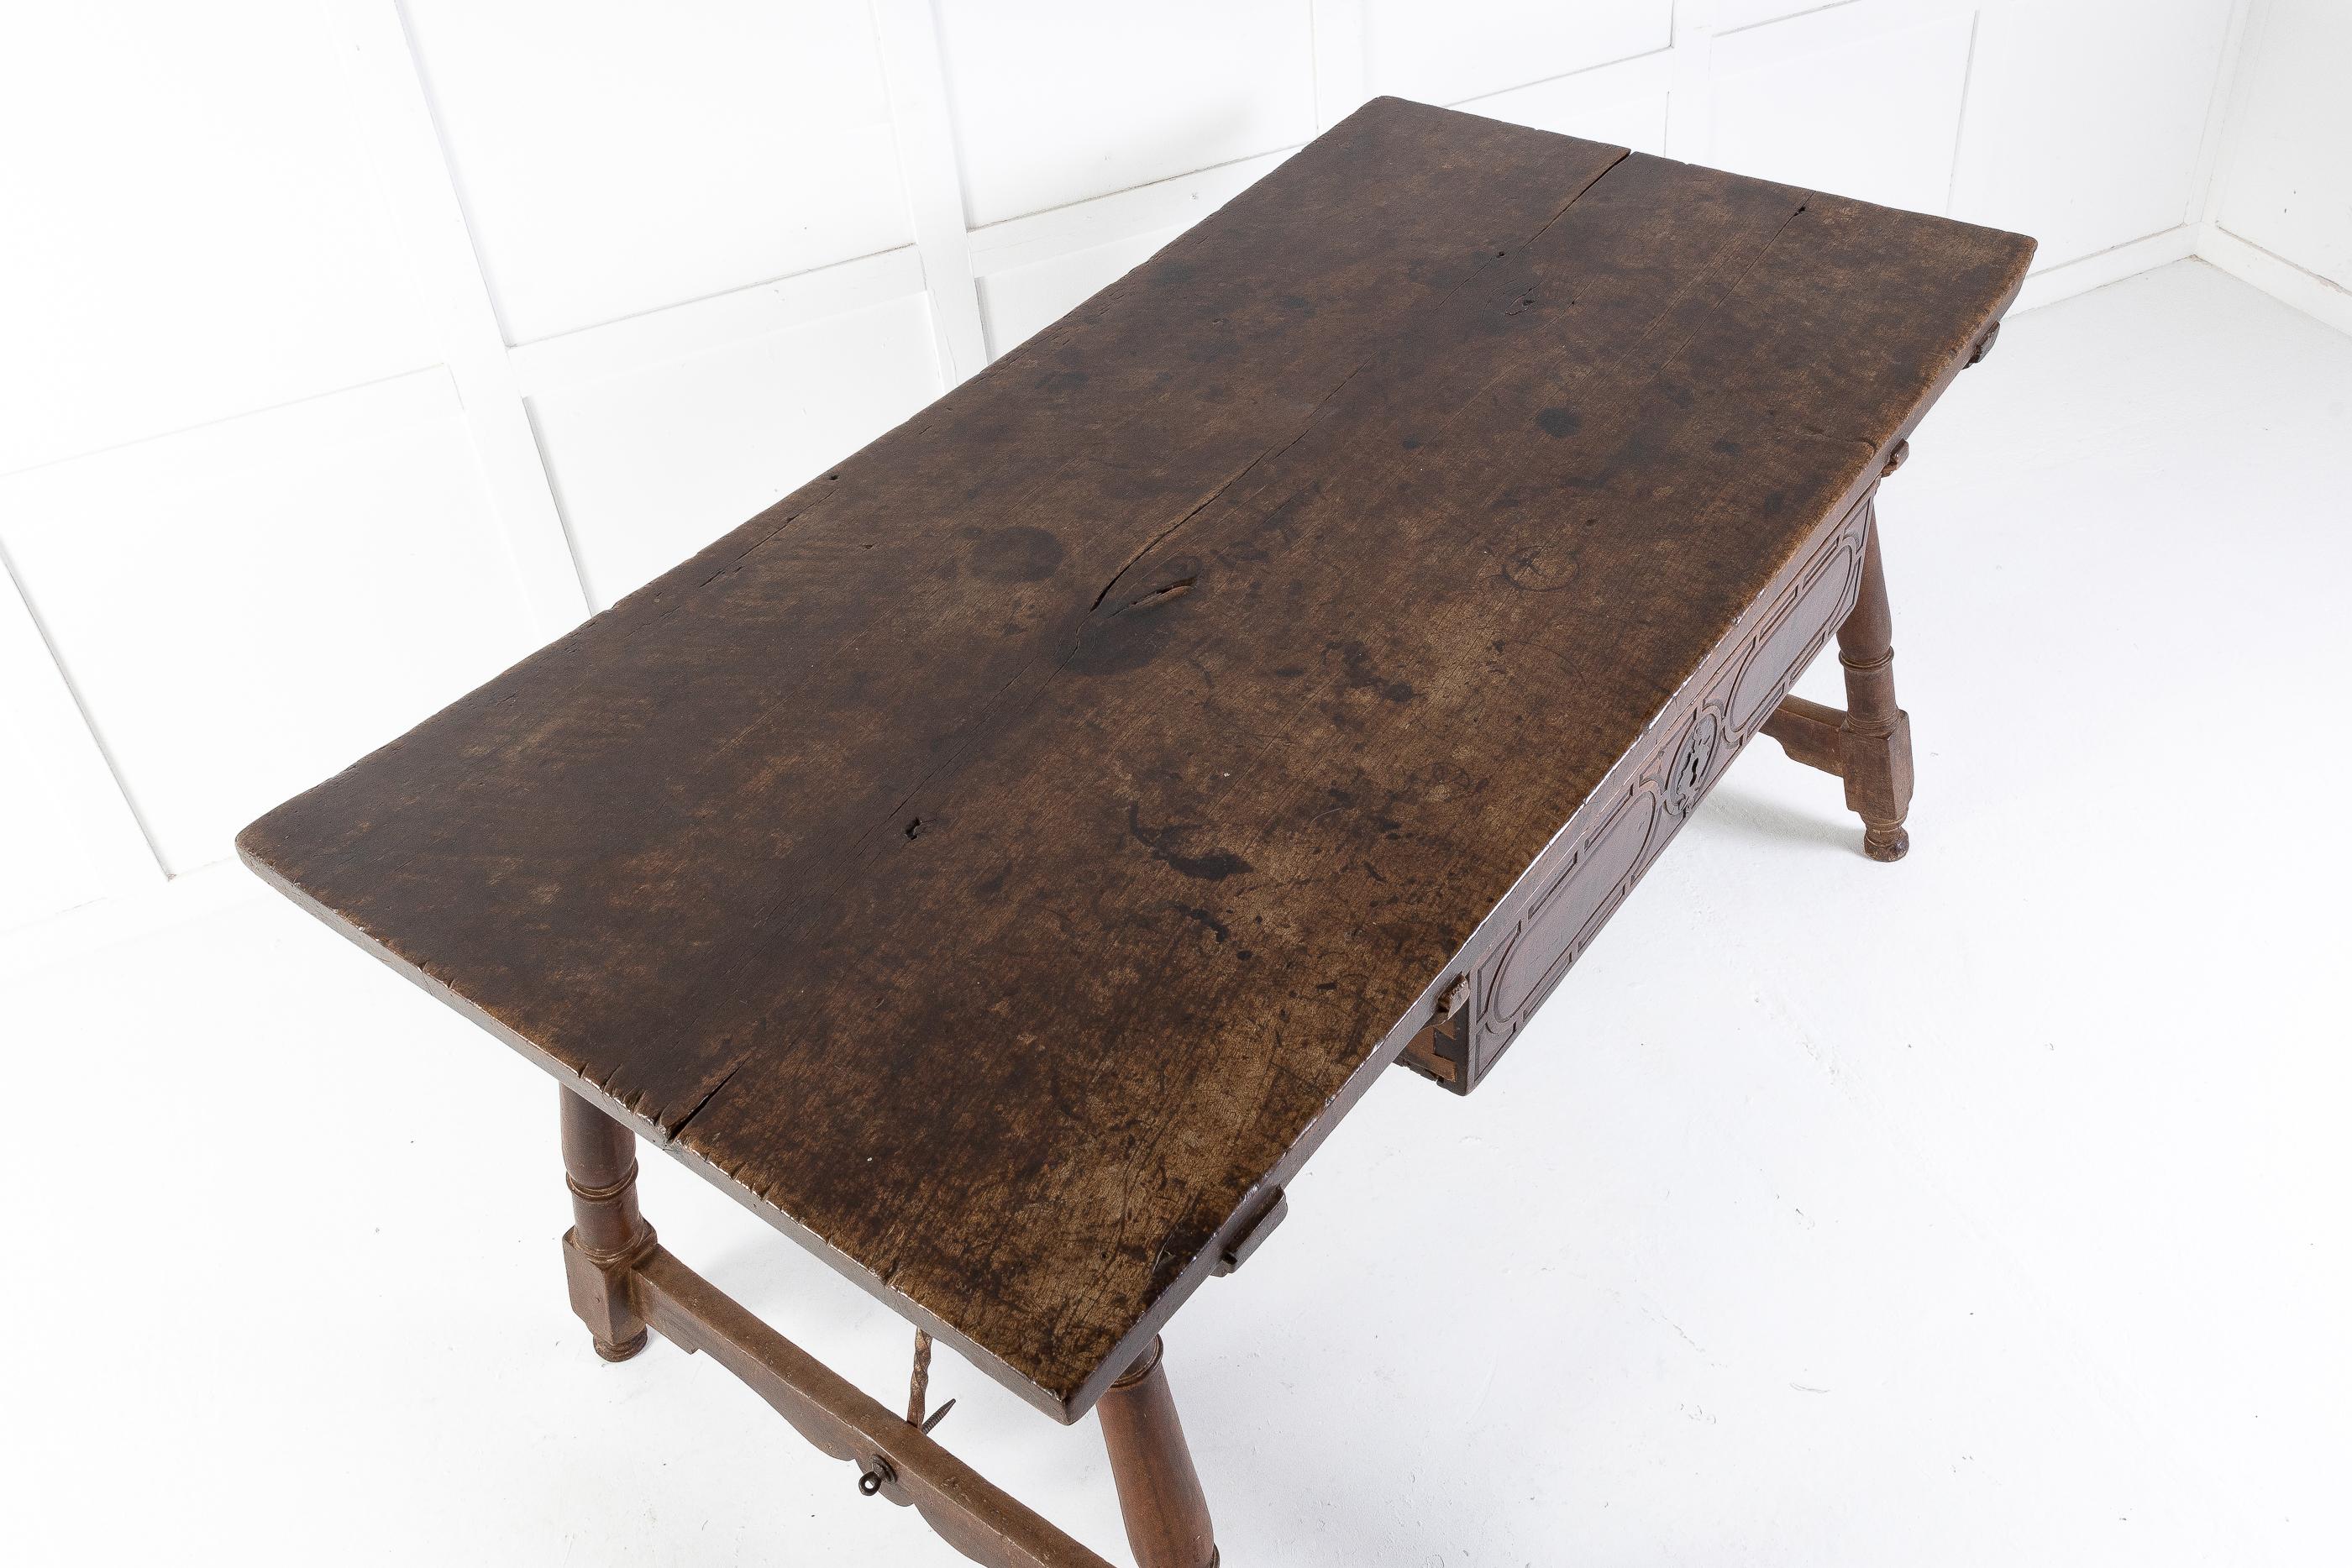 Magnificent large size, early 17th century Spanish table. The large, one piece top has the patination that in our opinion can’t be beaten. With a single beautiful patinated draw having its original lock. Also having original metal supports.

This